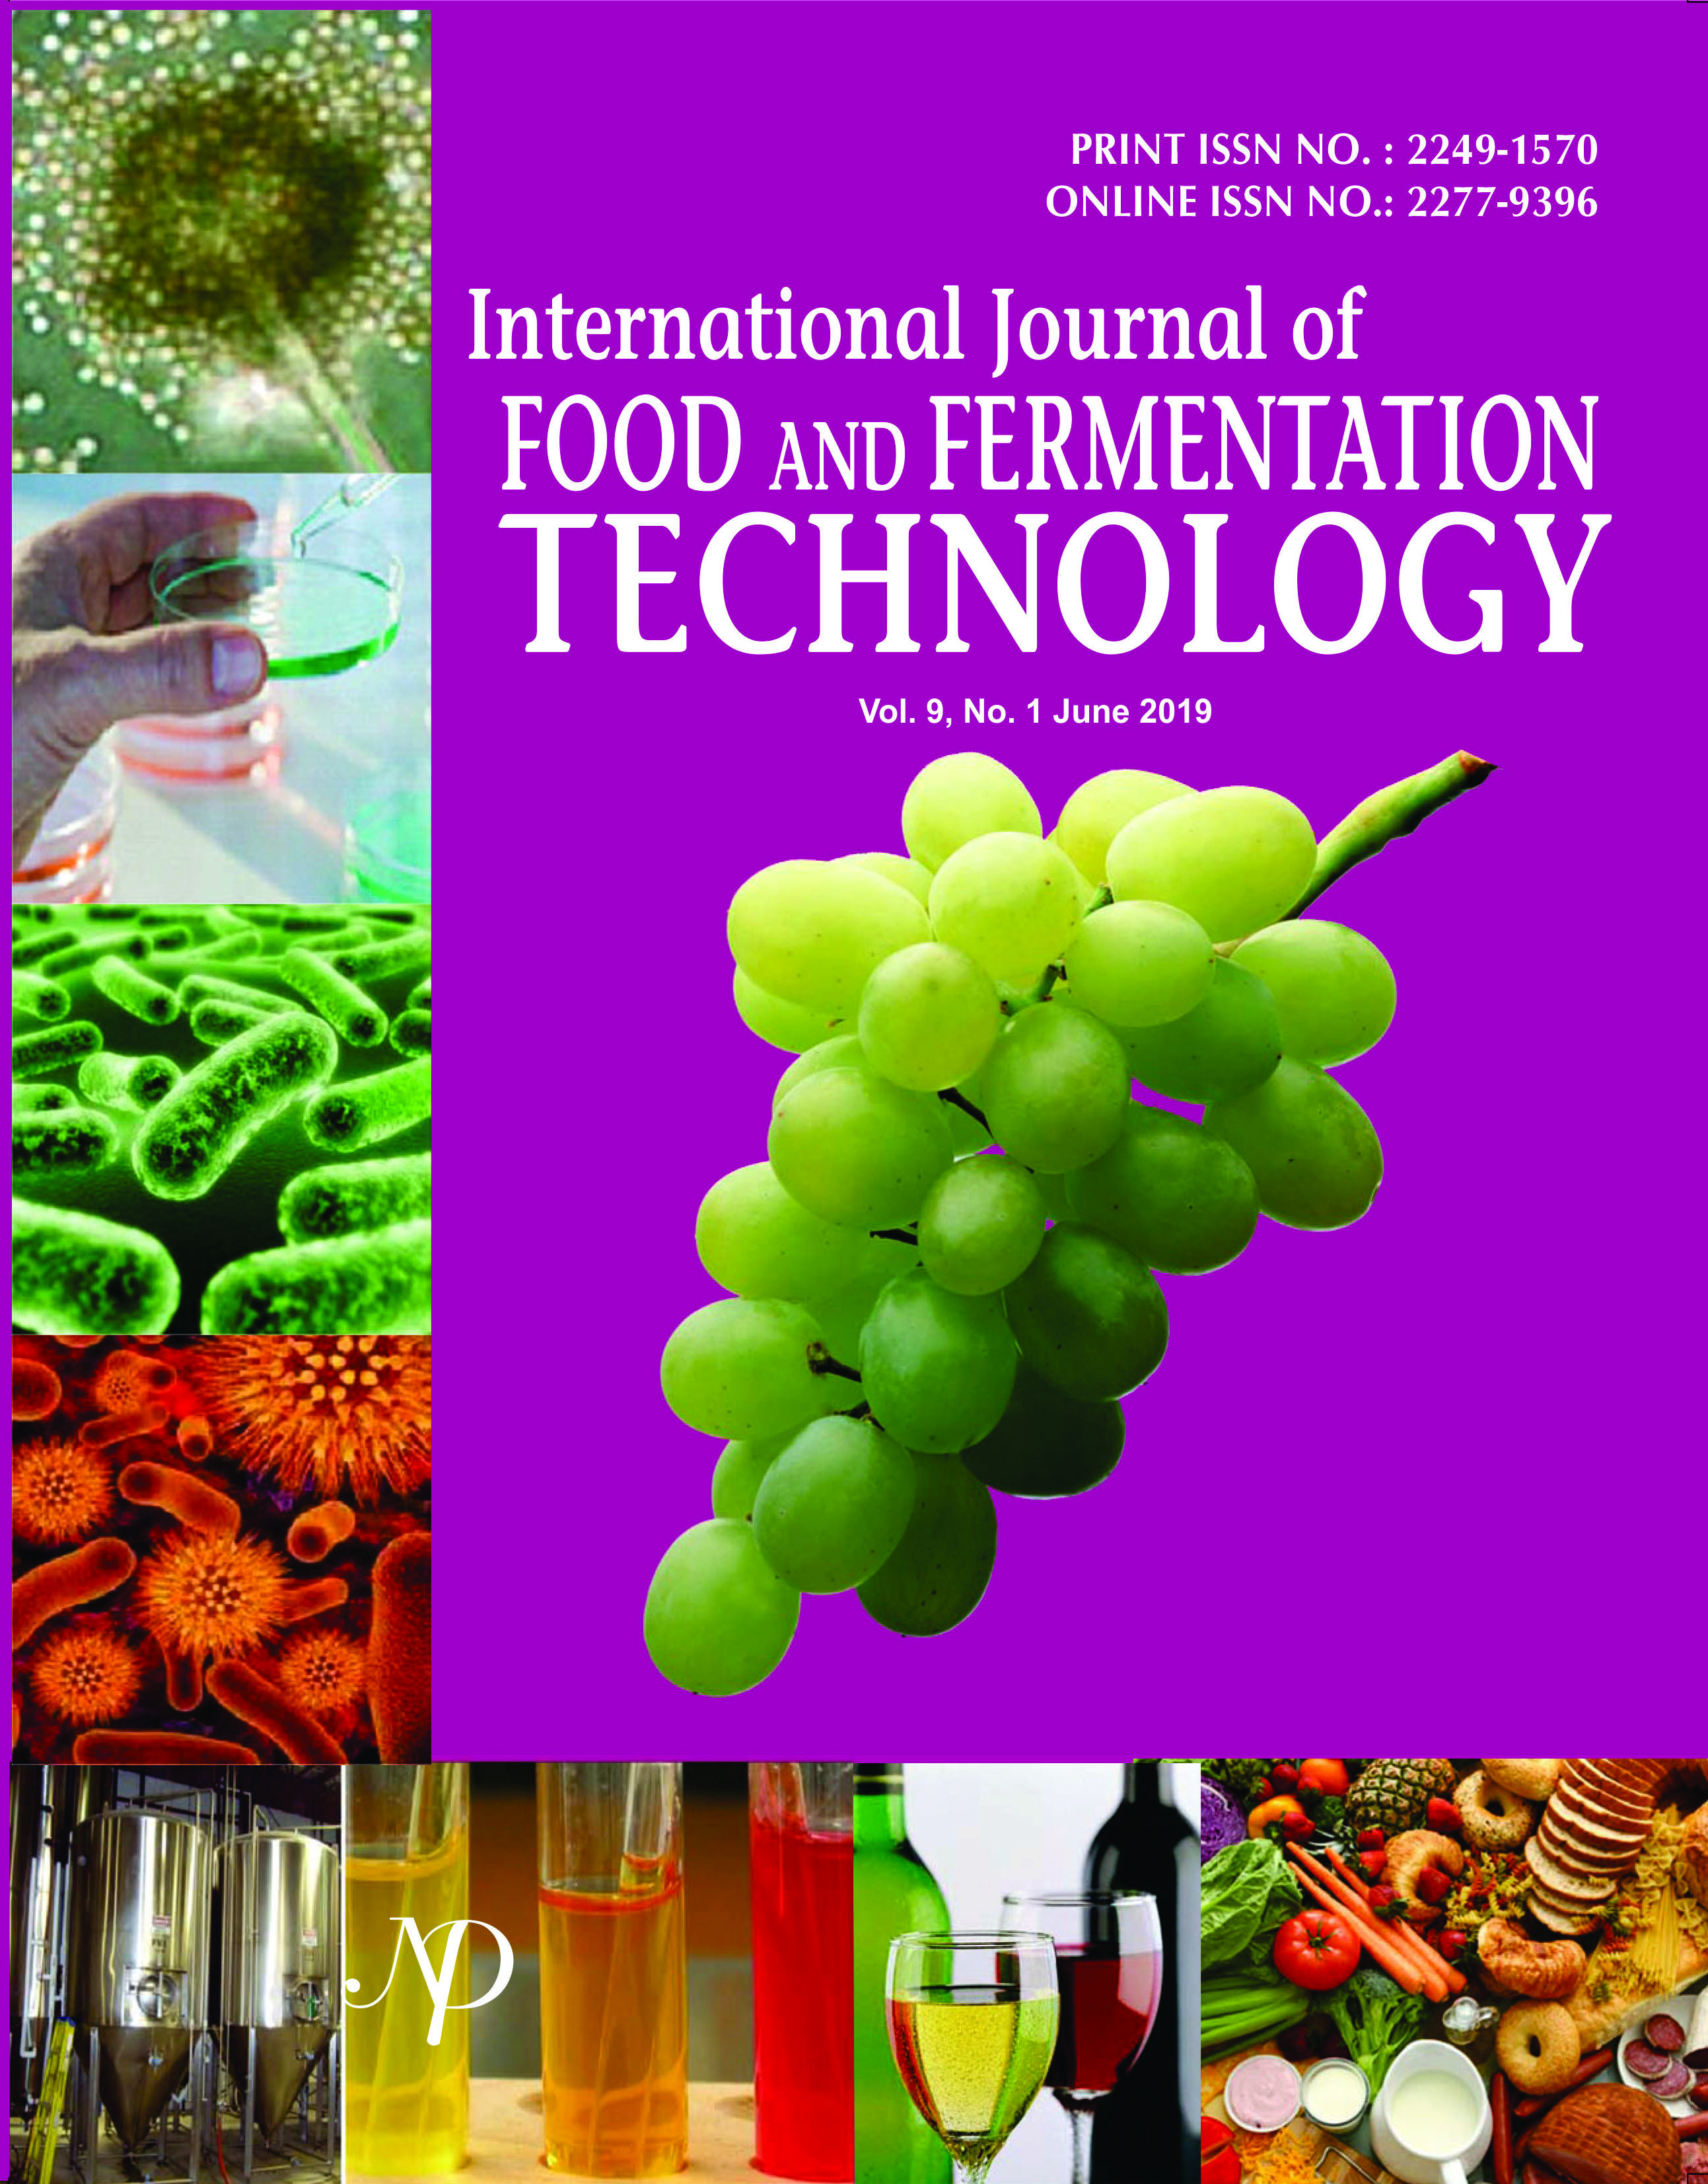 research articles in fermentation